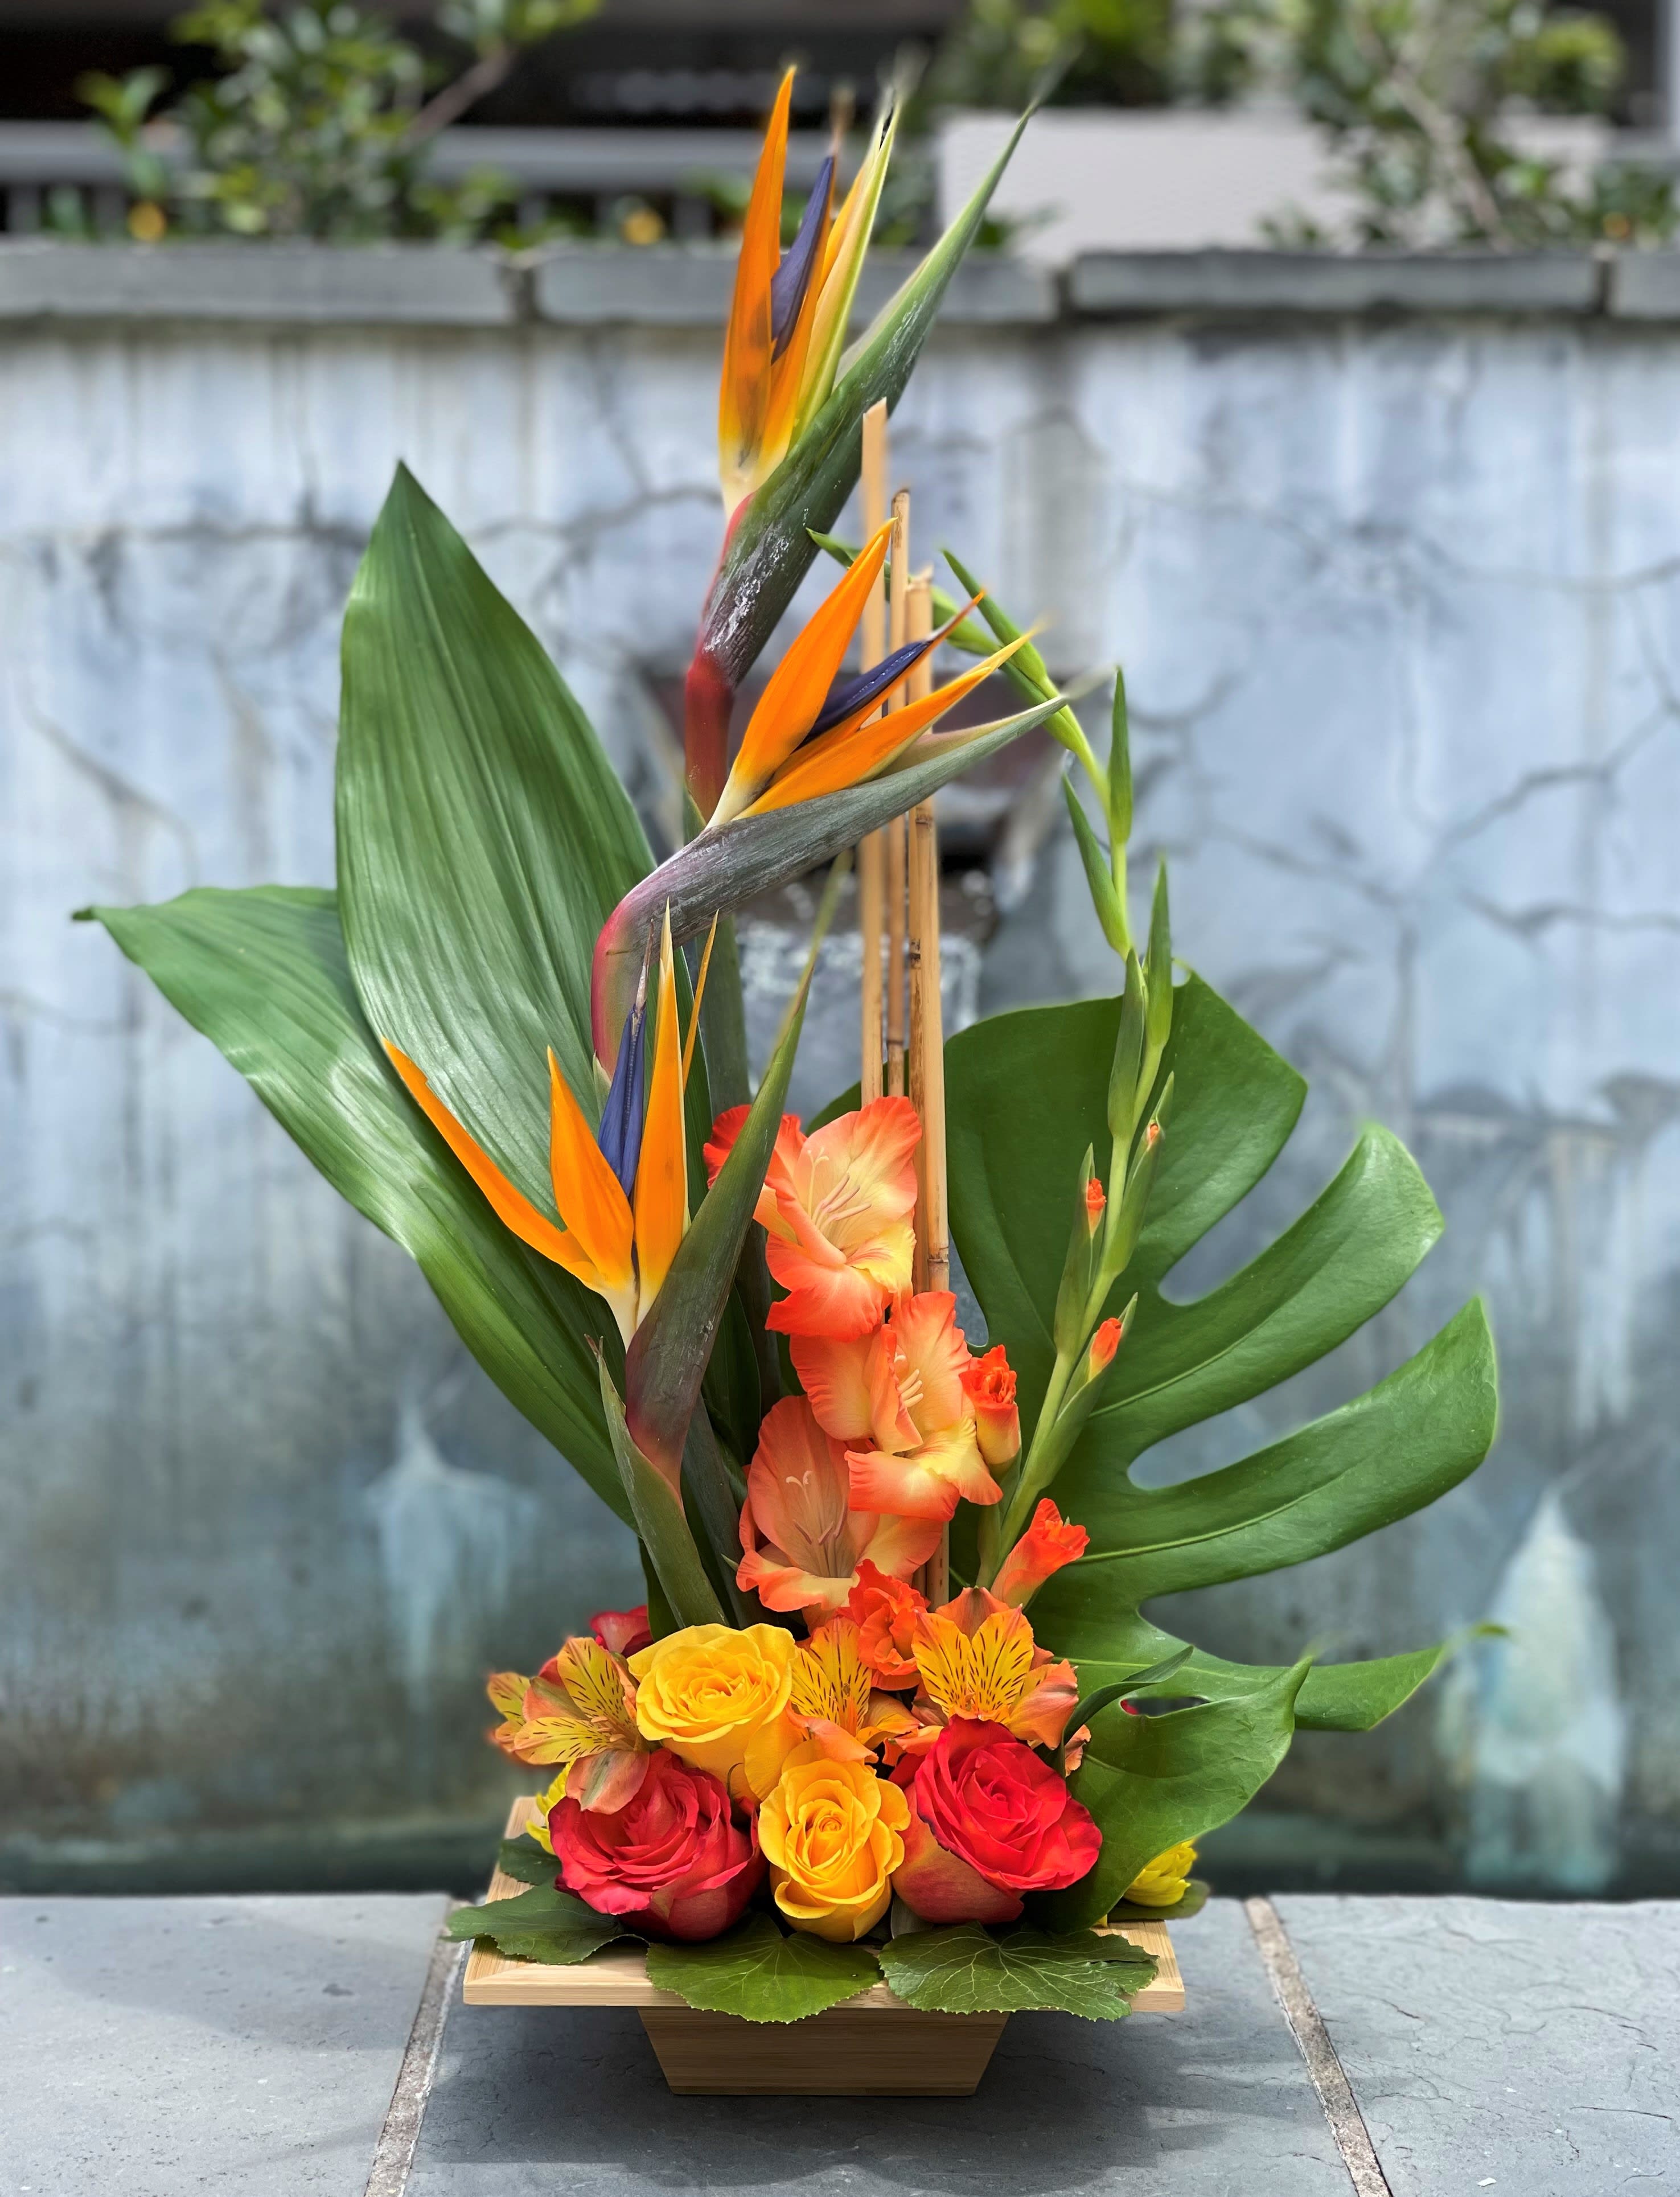 Zen Paradise - A tropical assortment of flowers creates the ambiance of an island paradise to help you find your inner zen.